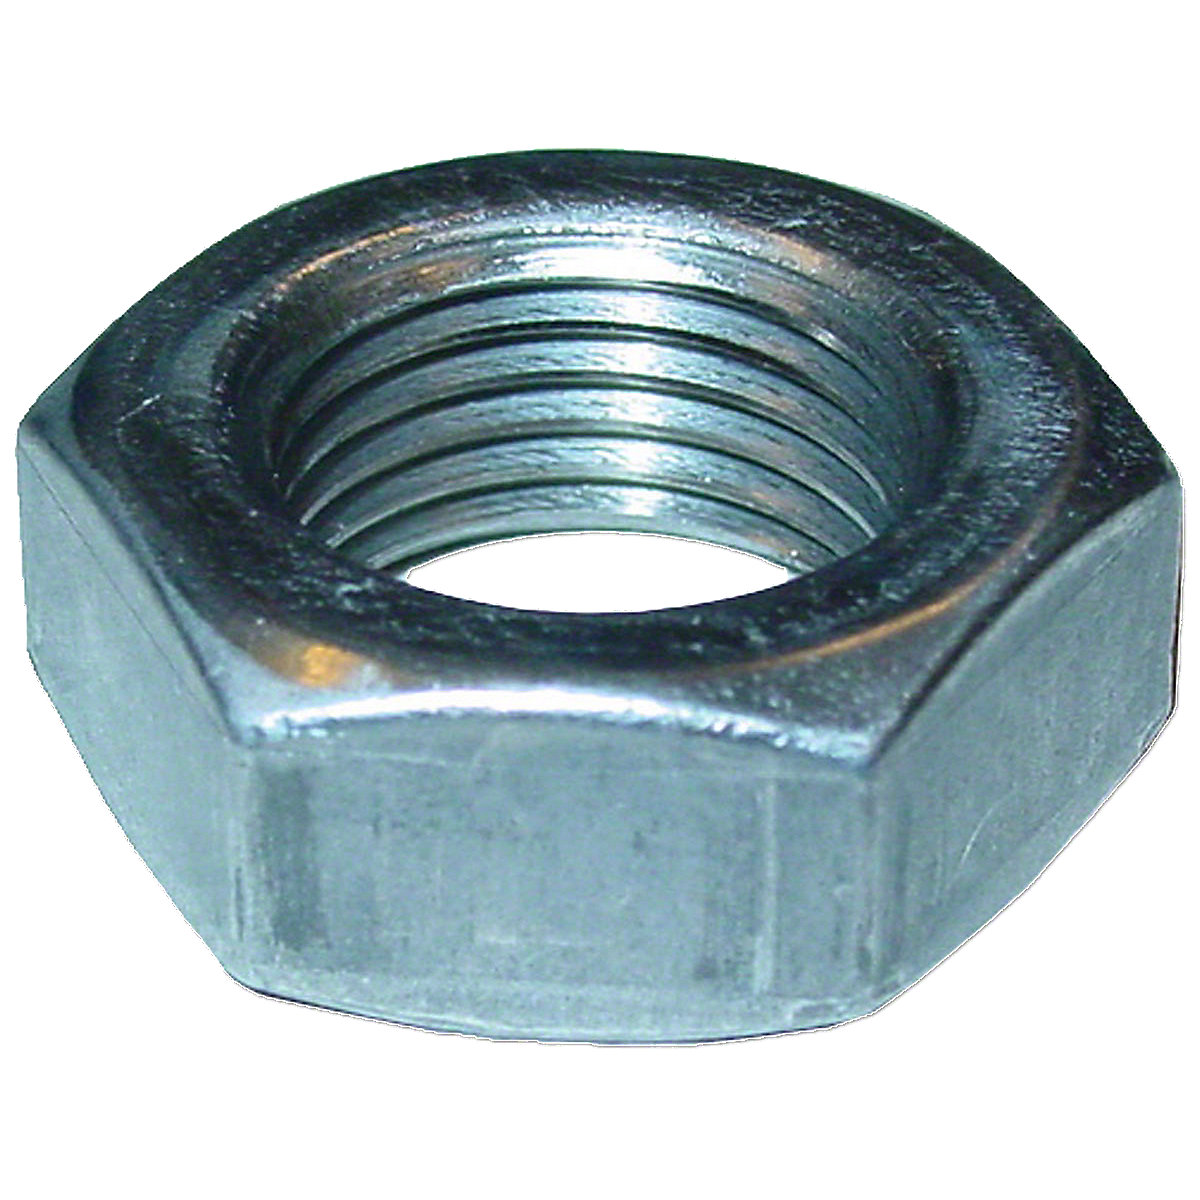 Fits: [ 1550, 1600, 1650, 1750, 1850, 1855, 1950, 1955, 2050 (with Gemmer power steering) ]
5/8 - 18 NF, 0.381 tall --- Plain Finish